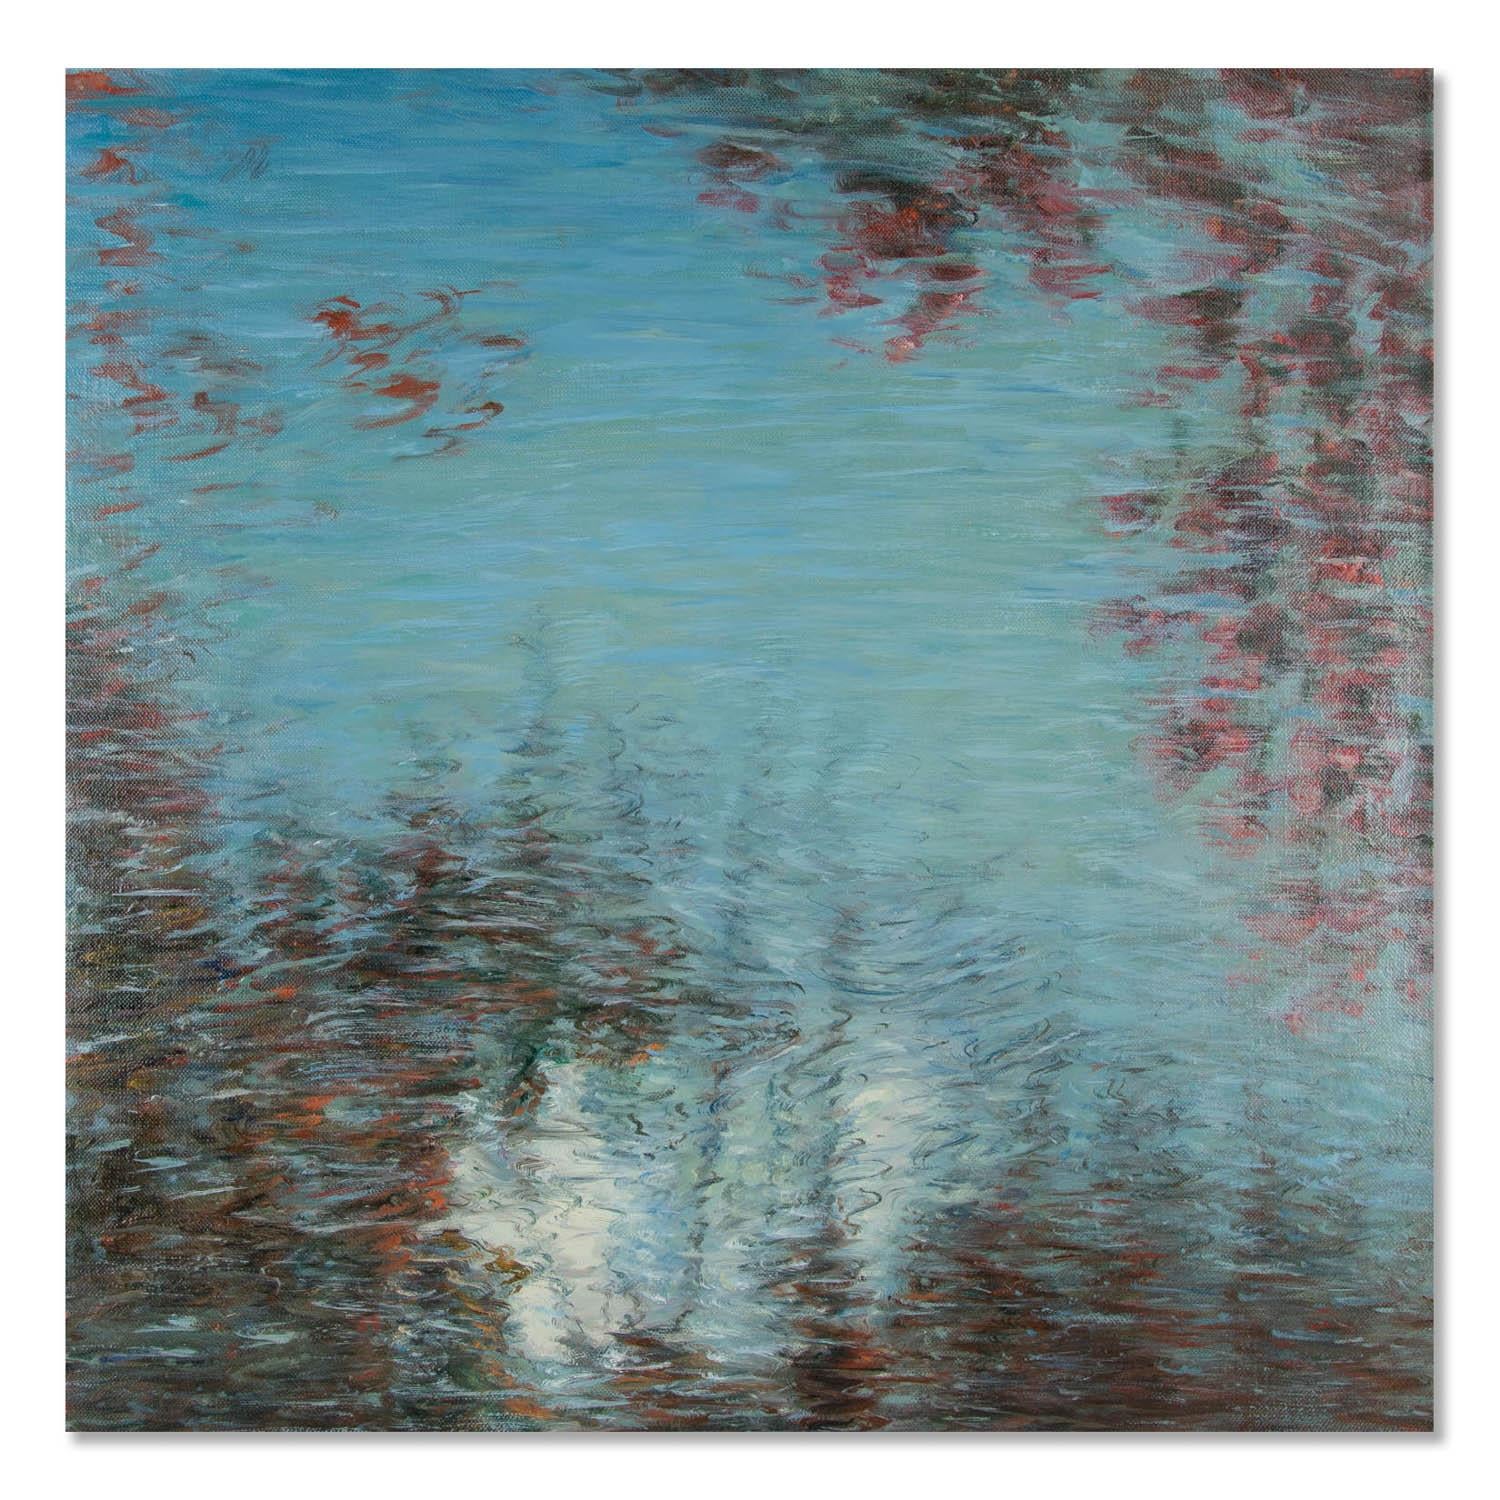  Title: Water Reflection - Cyan
 Medium: Oil on canvas
 Size: 23 x 23 inches
 Frame: Framing options available!
 Condition: The painting appears to be in excellent condition.
 
 Year: 2000 Circa
 Artist: Wei Wang
 Signature: Unsigned
 Signature